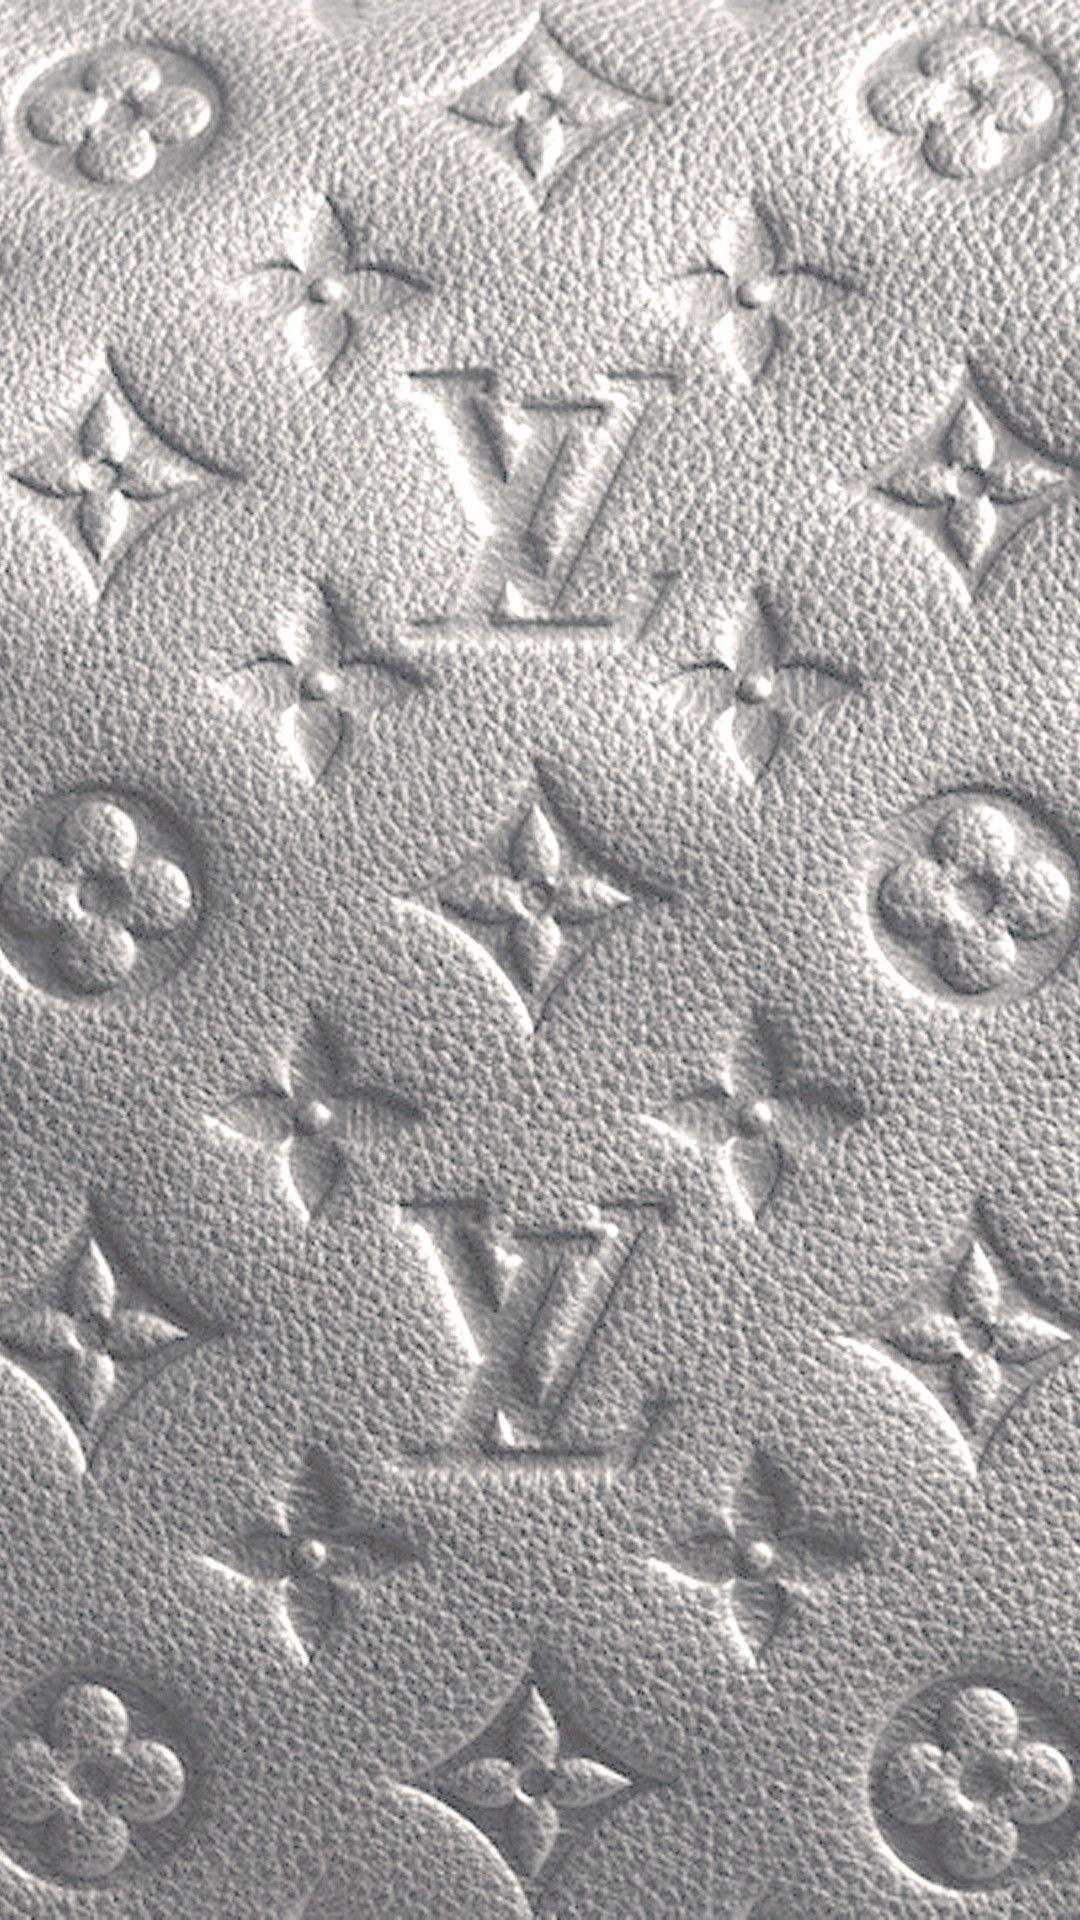 louis vuitton black and white background